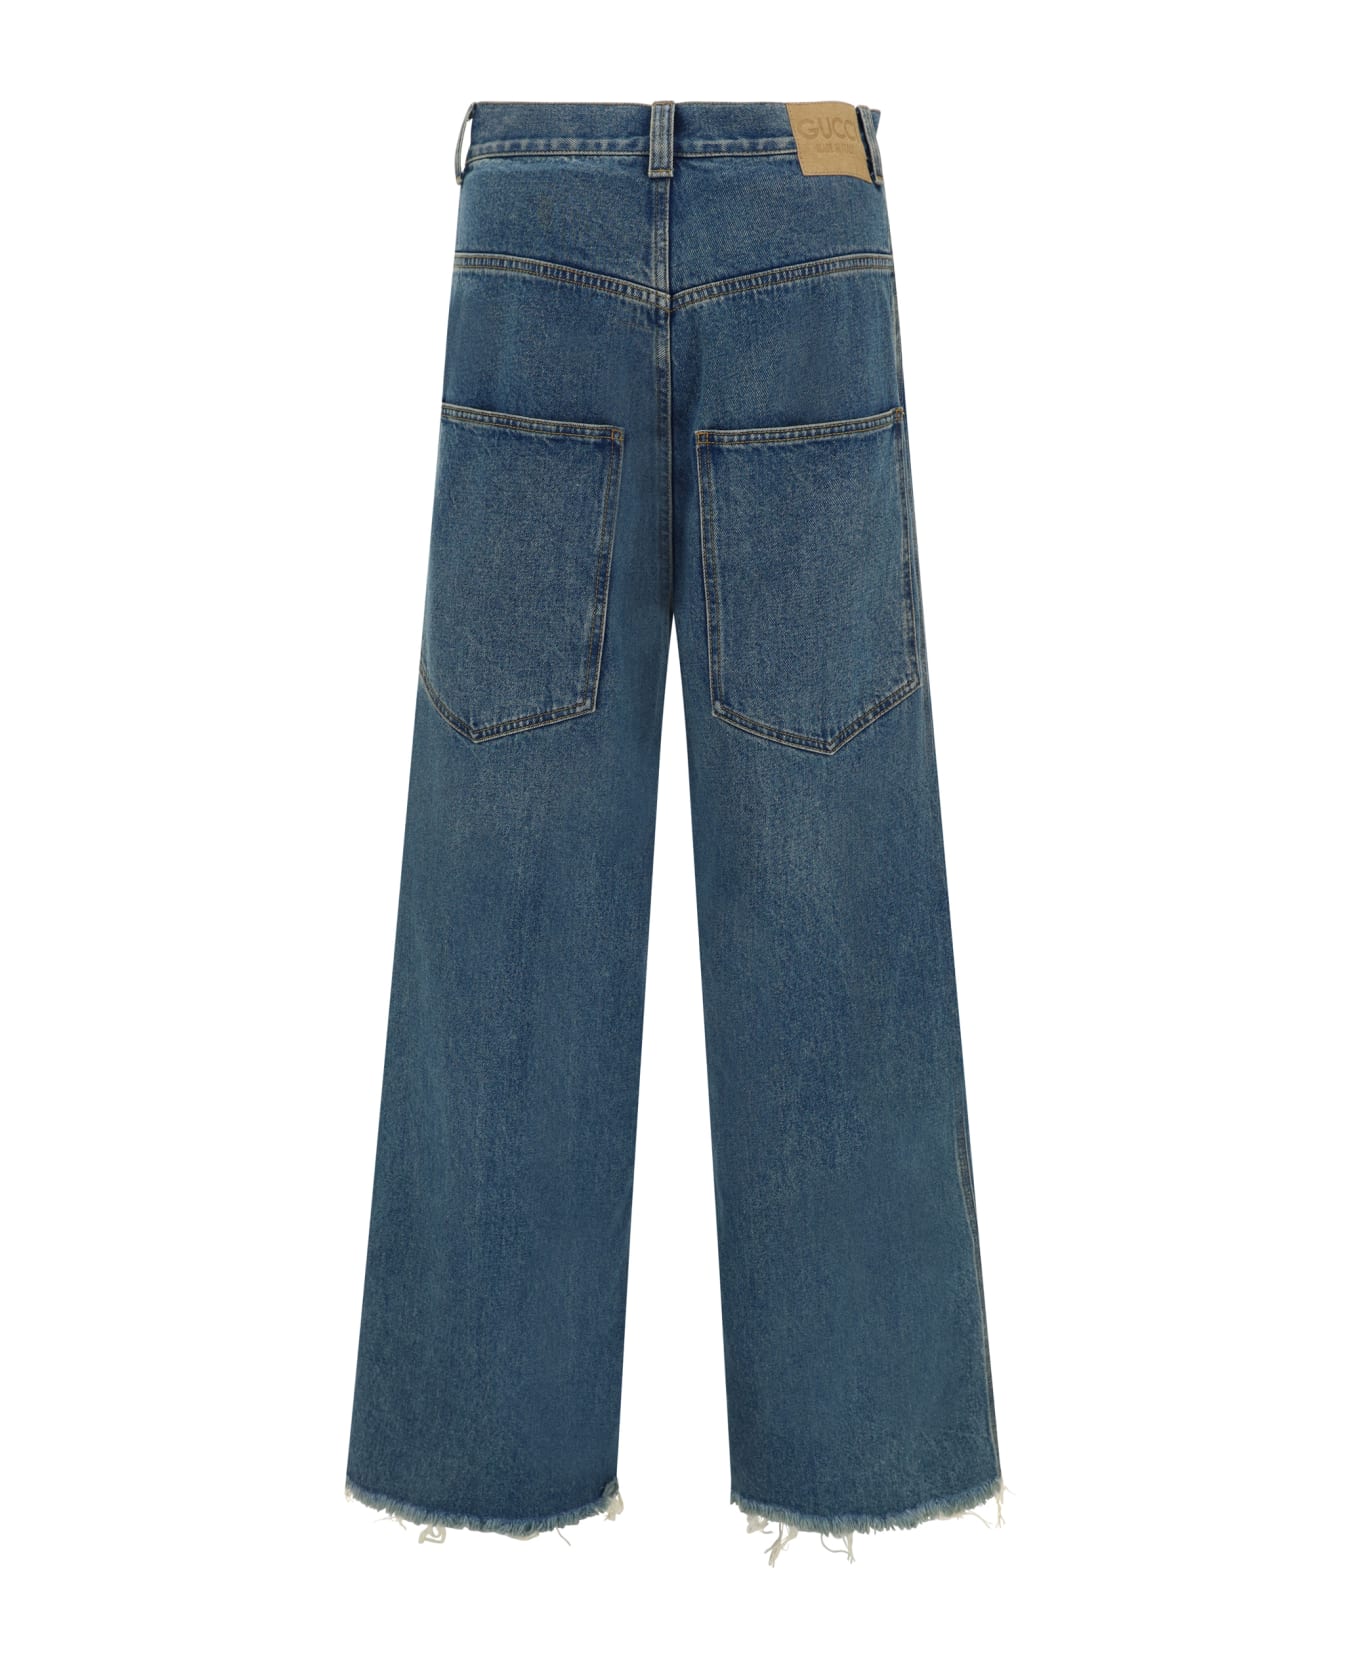 Gucci Jeans - Blue ボトムス